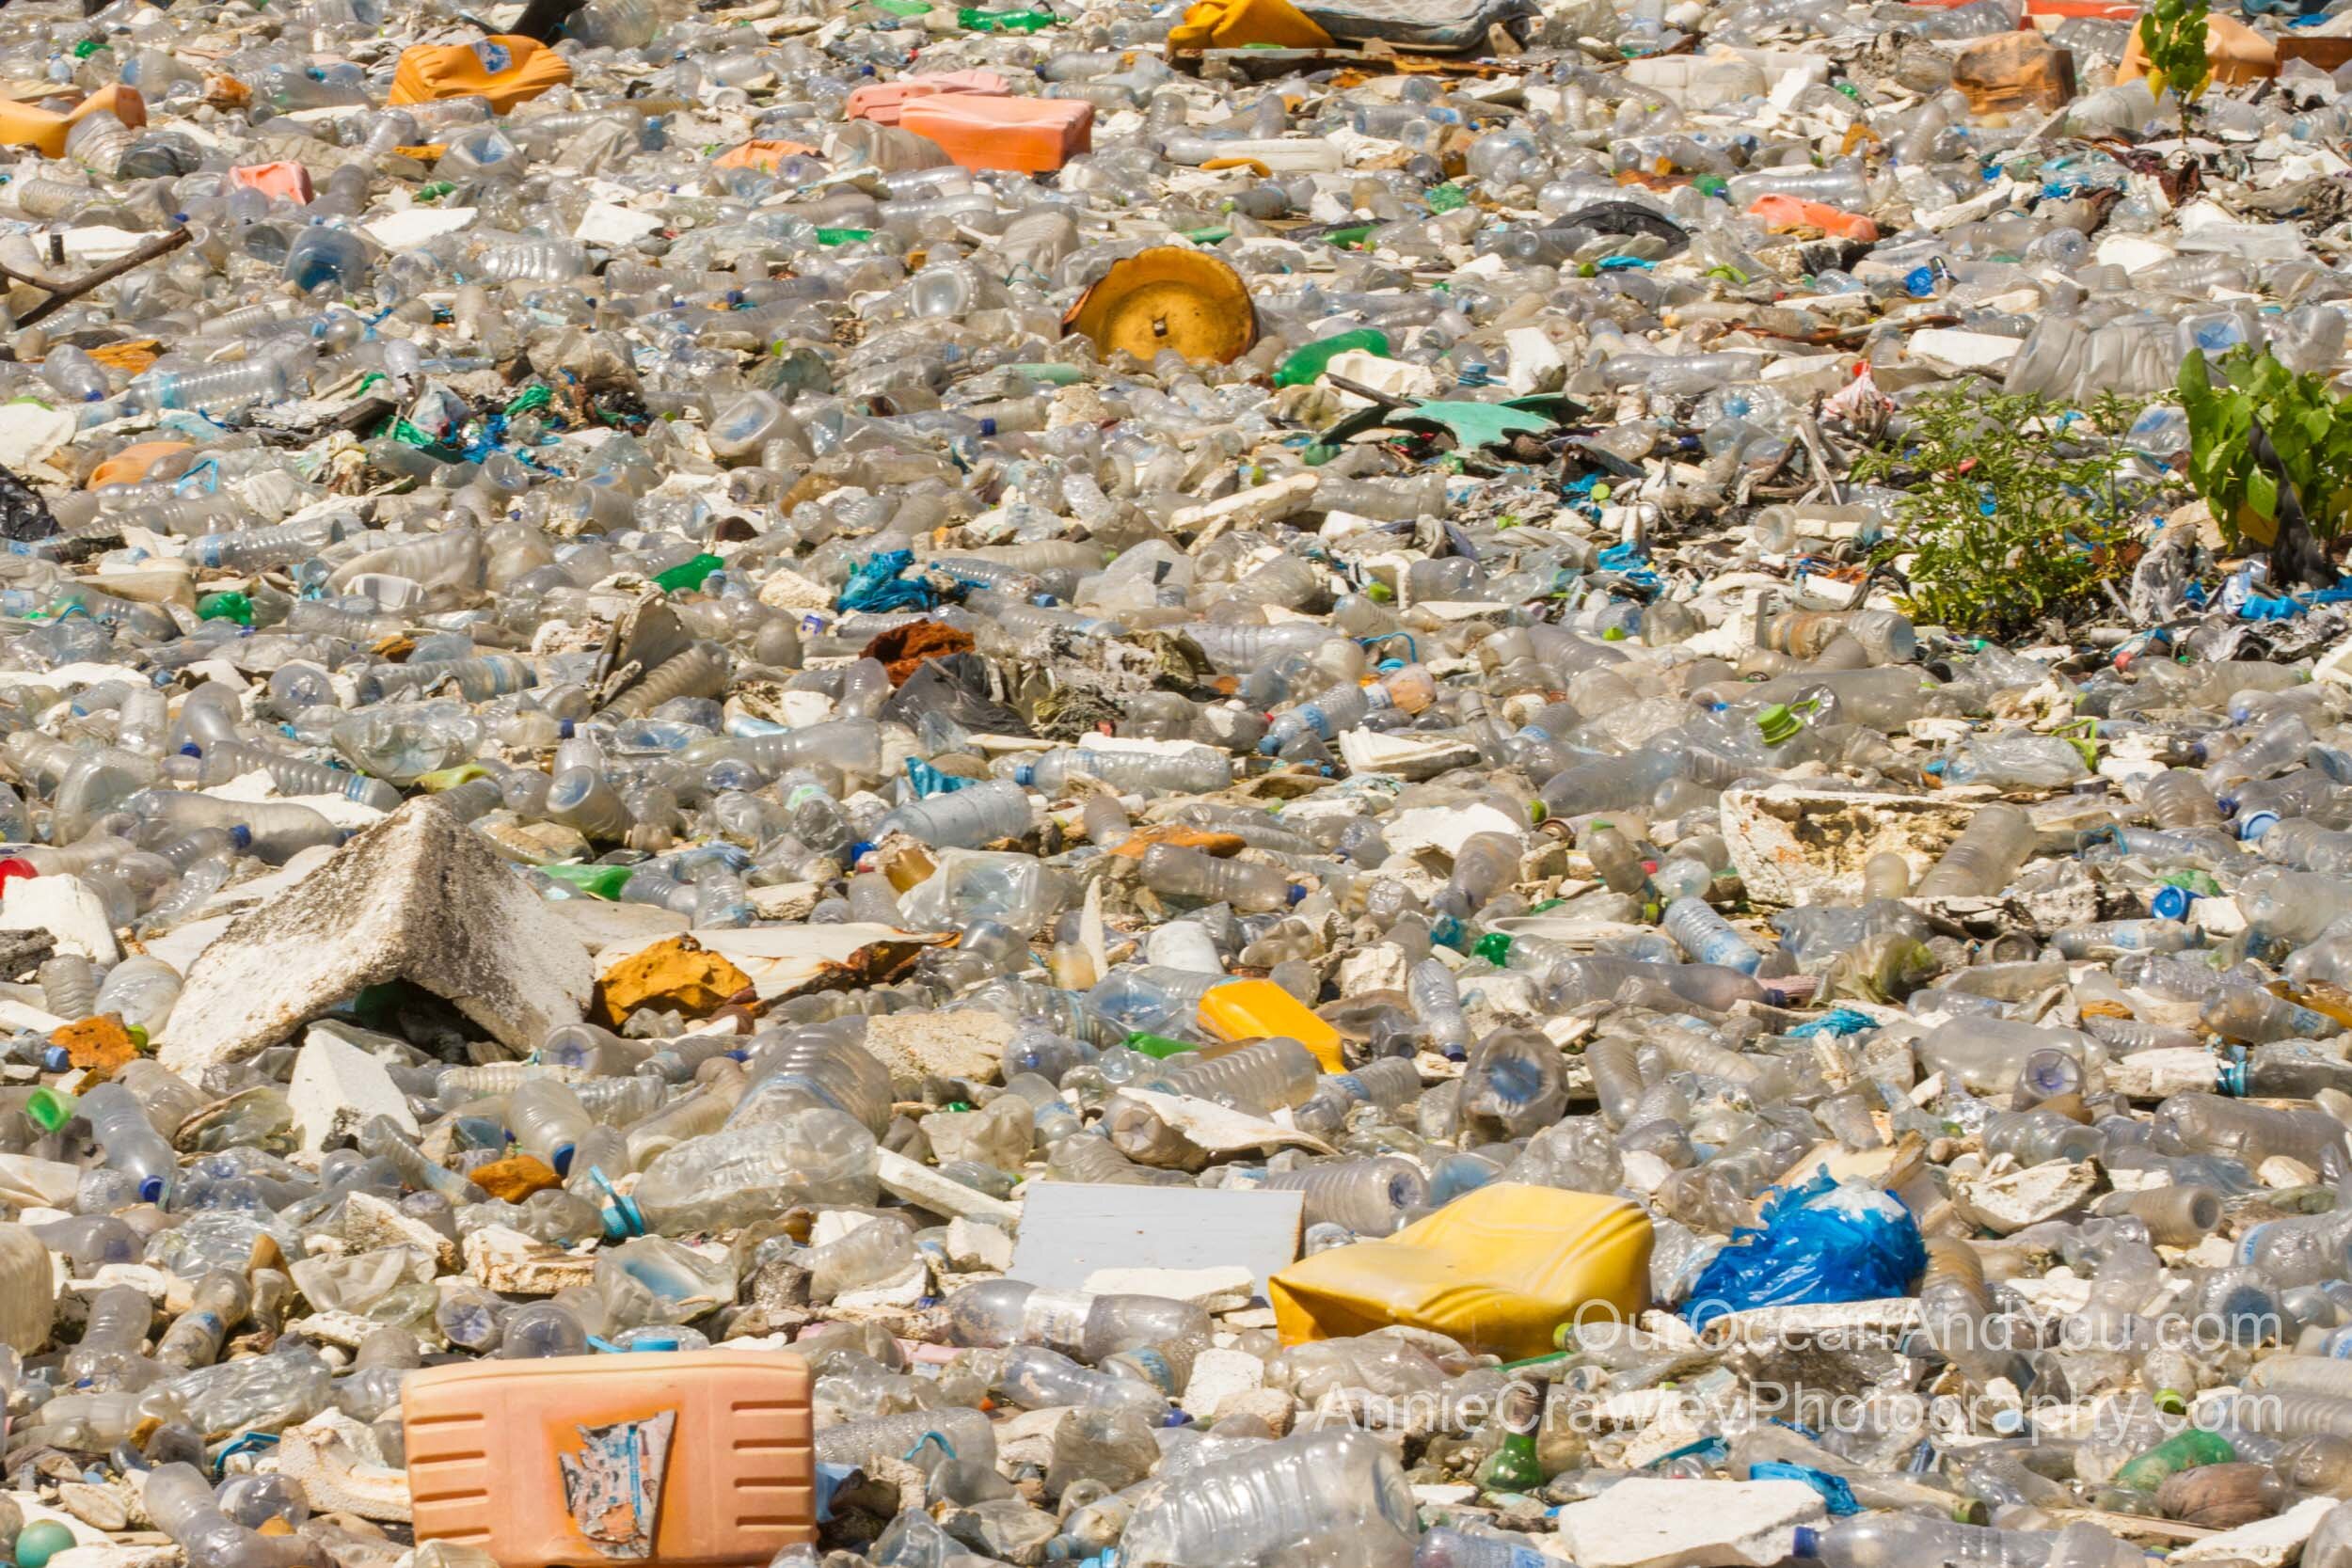 11 million metric tones of plastic enters our ocean every year. (Copy)